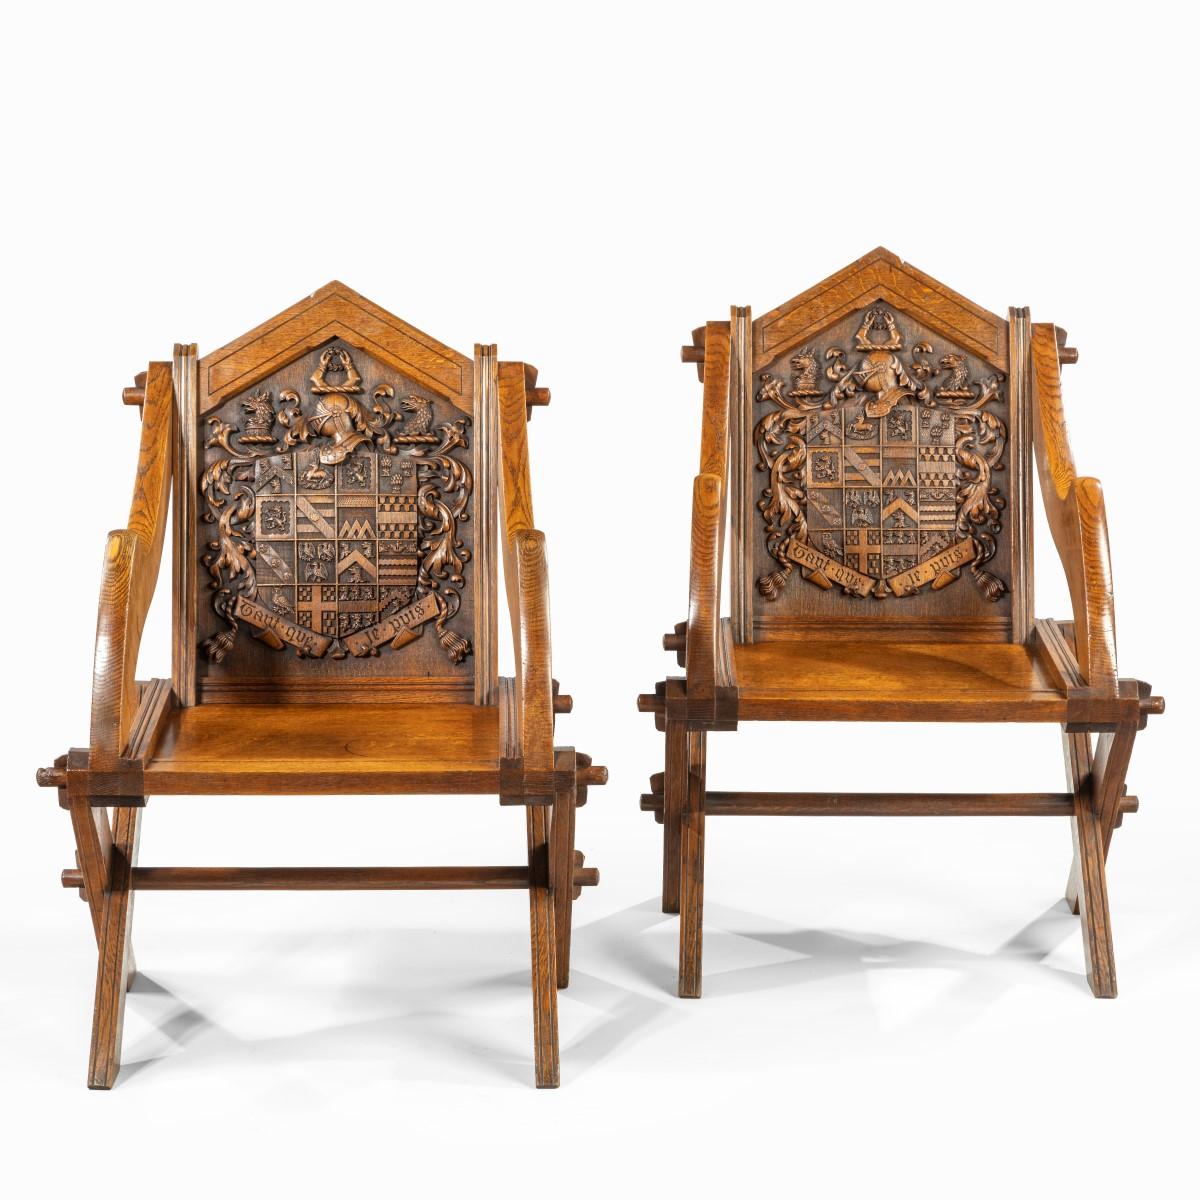 A pair of Glastonbury chairs made for the Pembertons of Durham